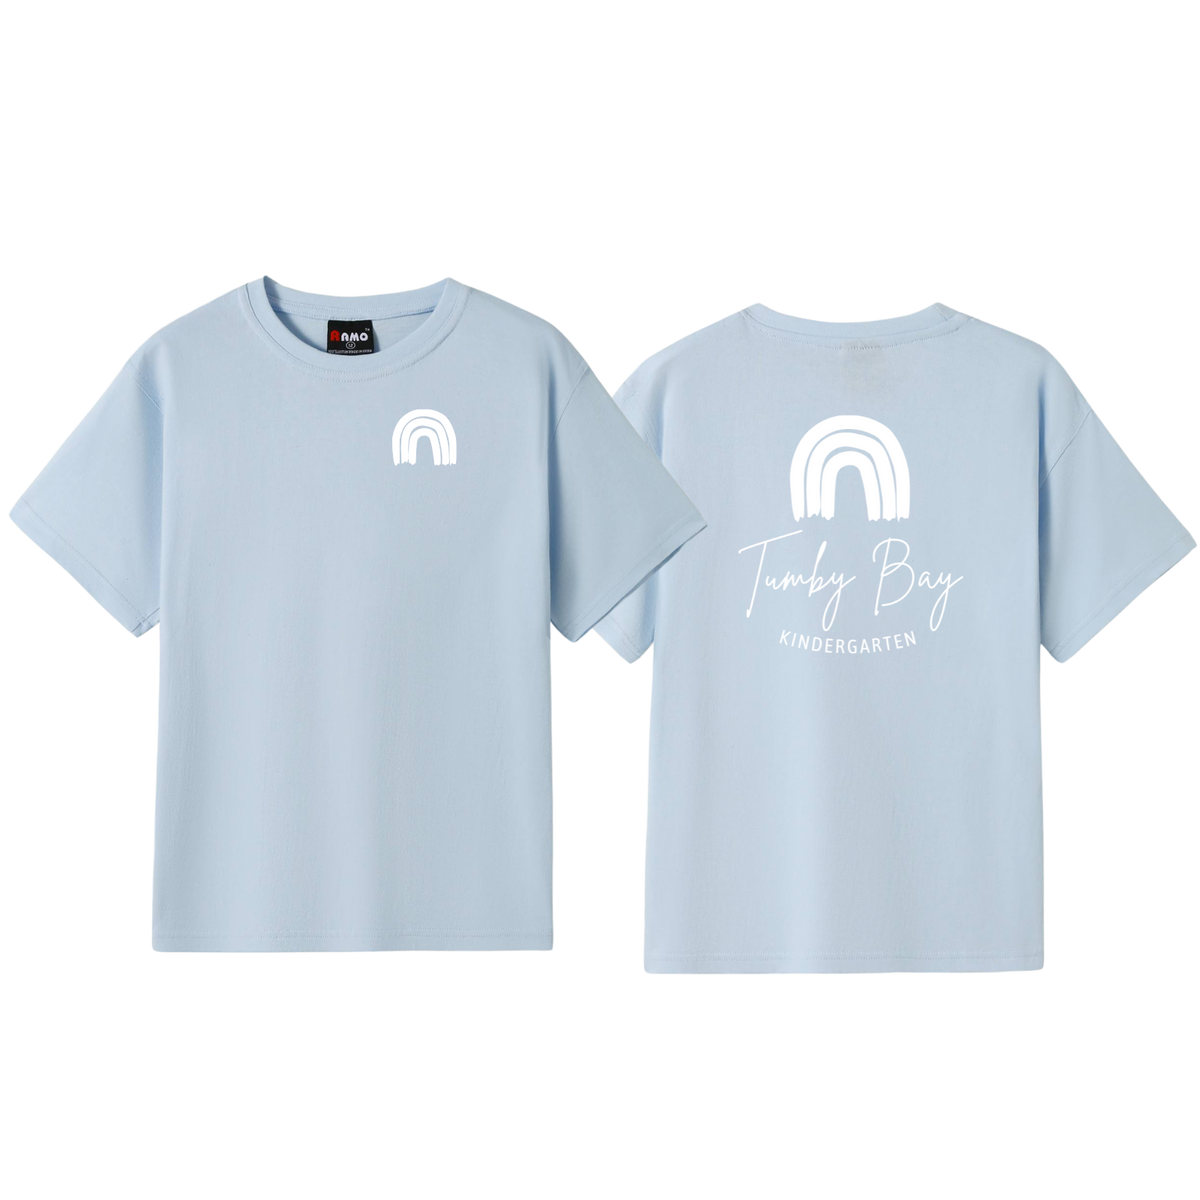 Tumby Bay Kindergarten Kids Crew Neck Tees Logo Print Front and Back T302HT-Collins Clothing Co